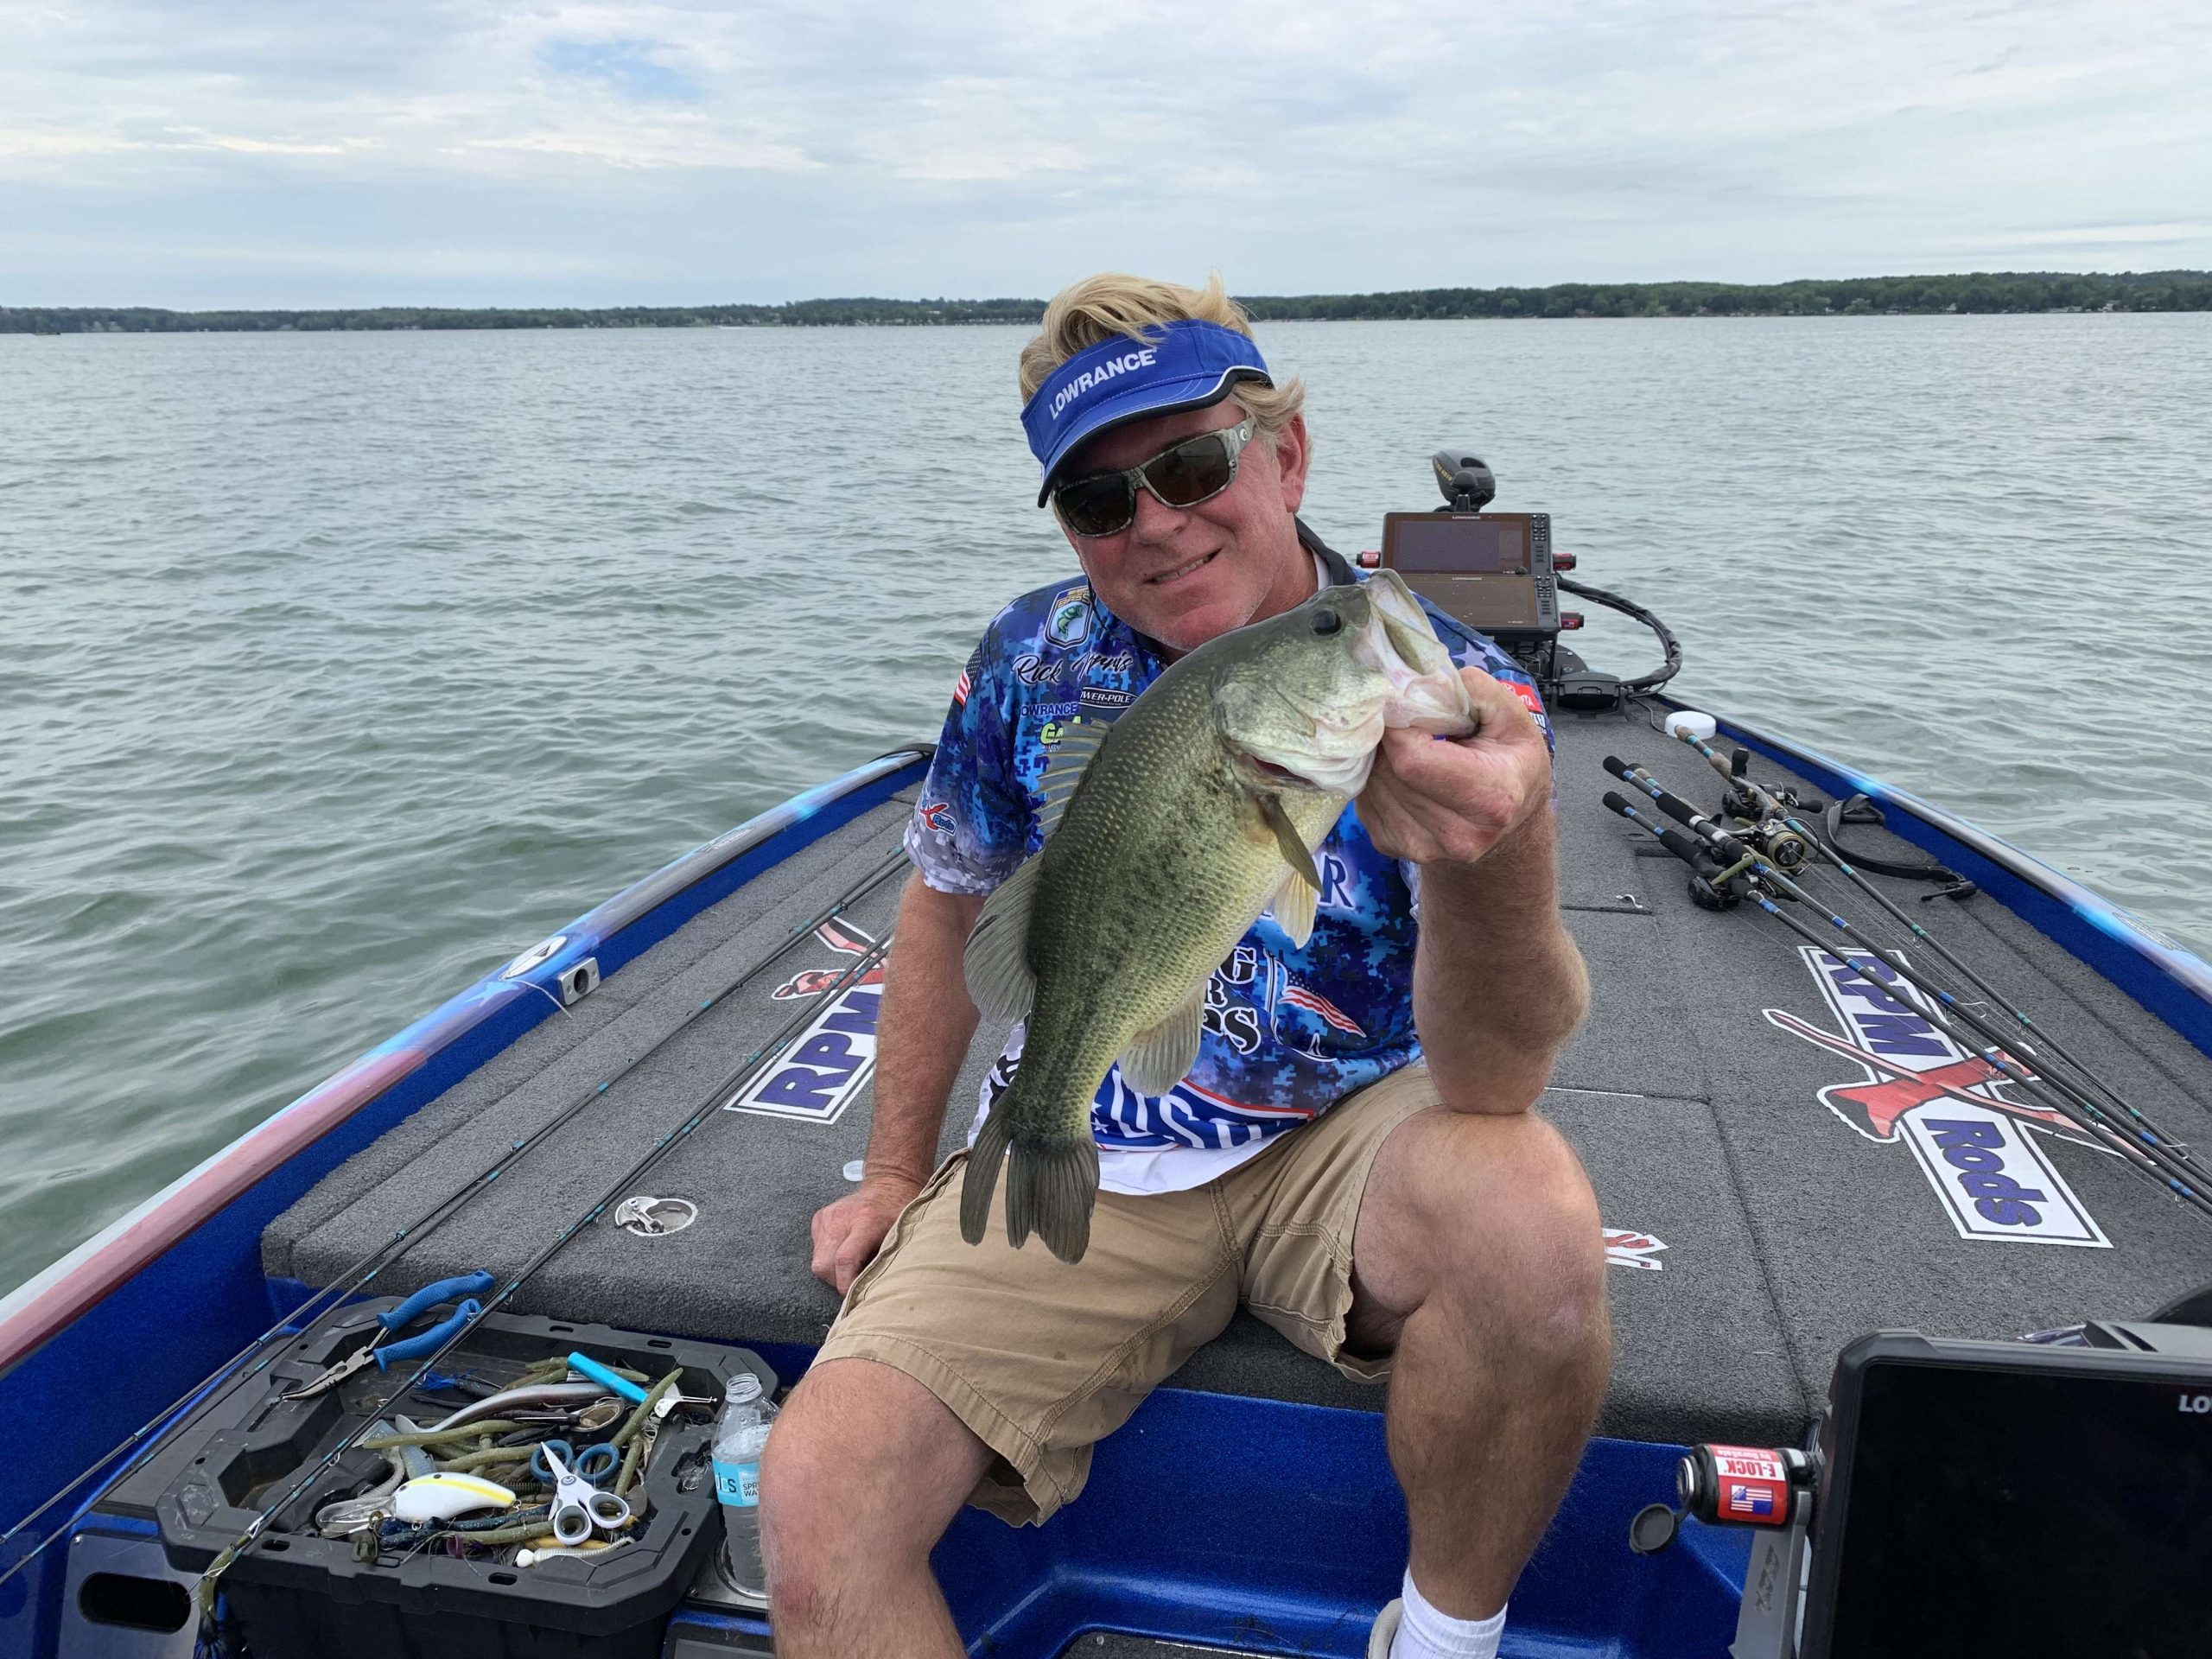 So, he is finally loosening up! Rick Morris was a bit frustrated until 11 am but look at him now! He has a limit but he has more work to do to bring up that poundage.